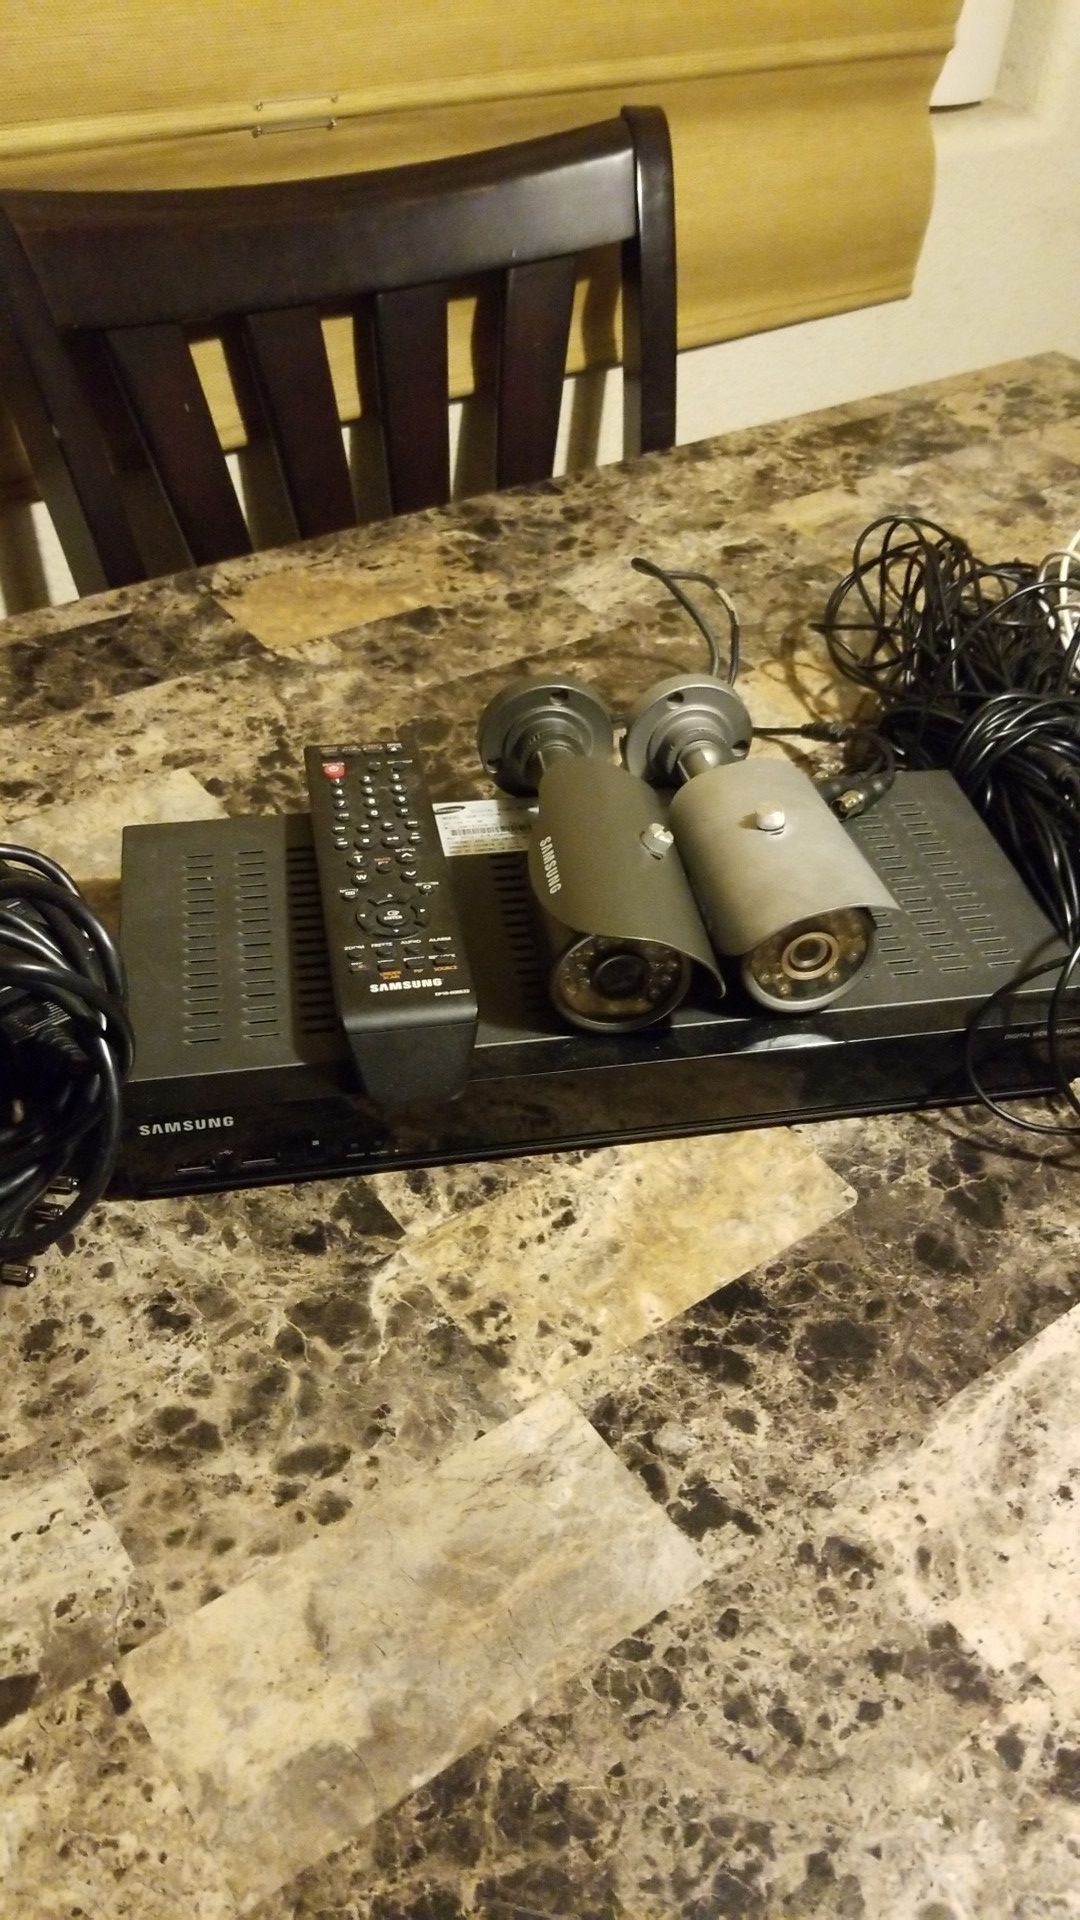 Samsung dvr security camera system with cords